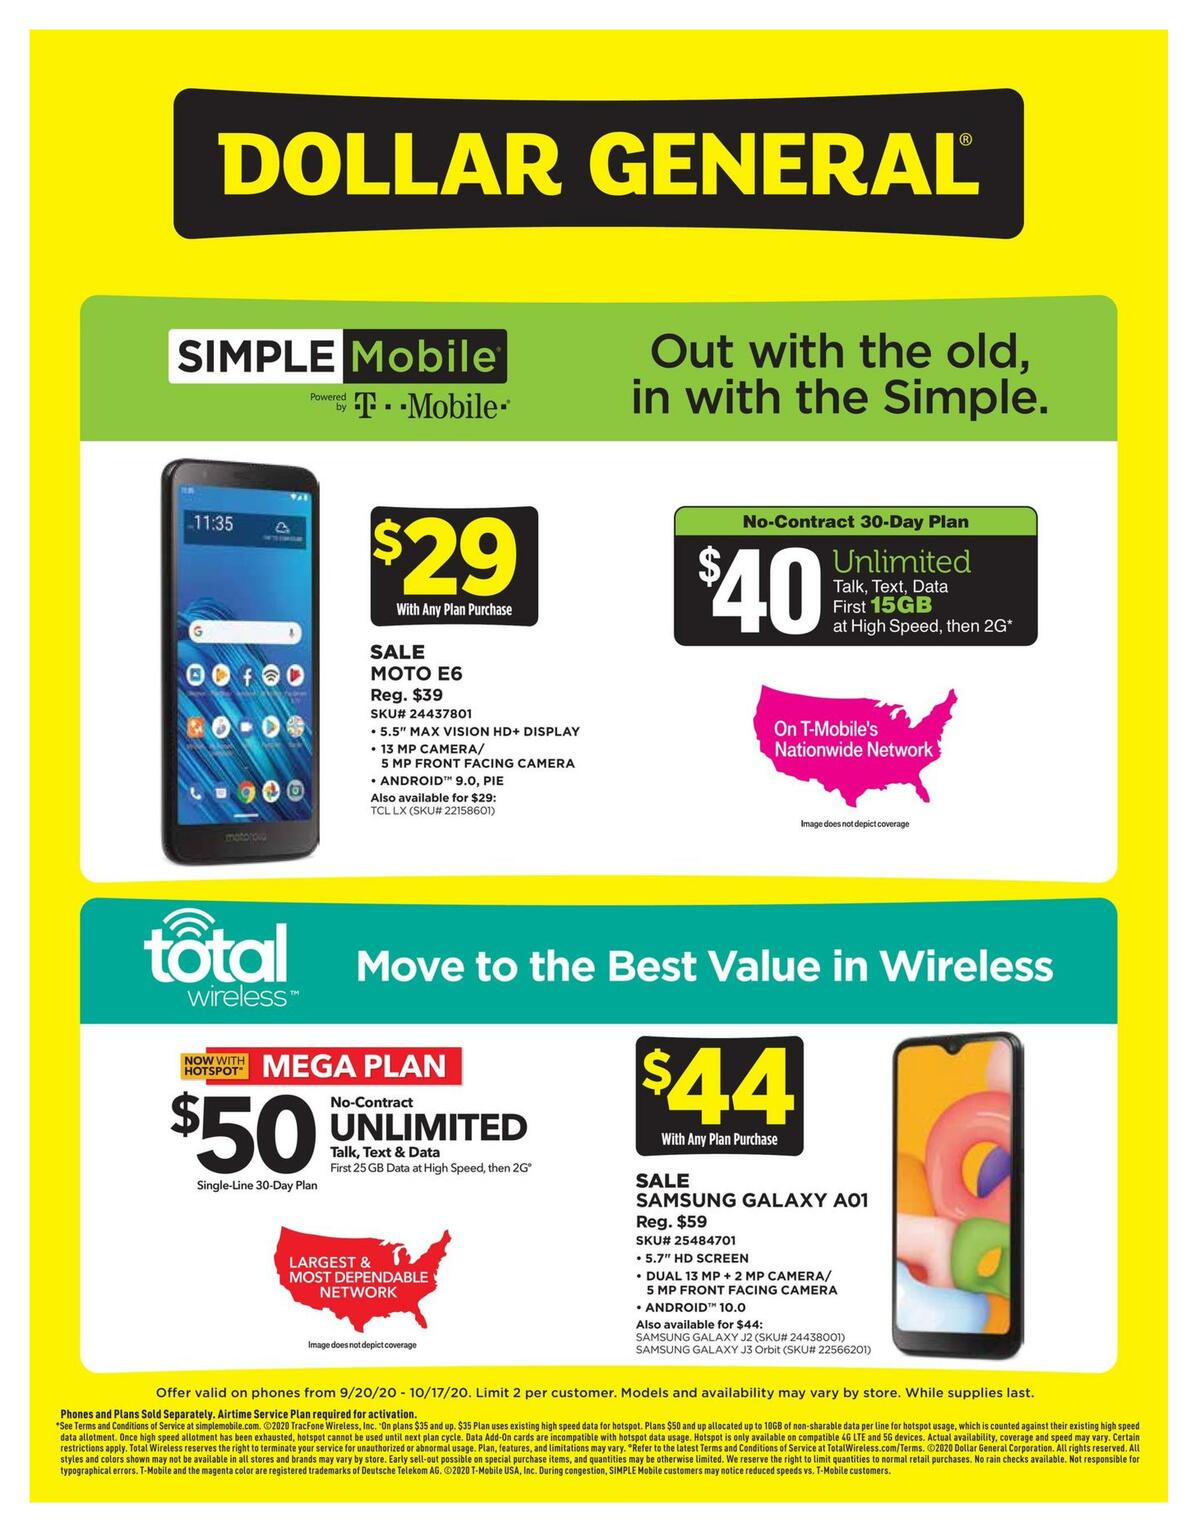 Dollar General Weekly Wireless Specials Weekly Ad from September 20